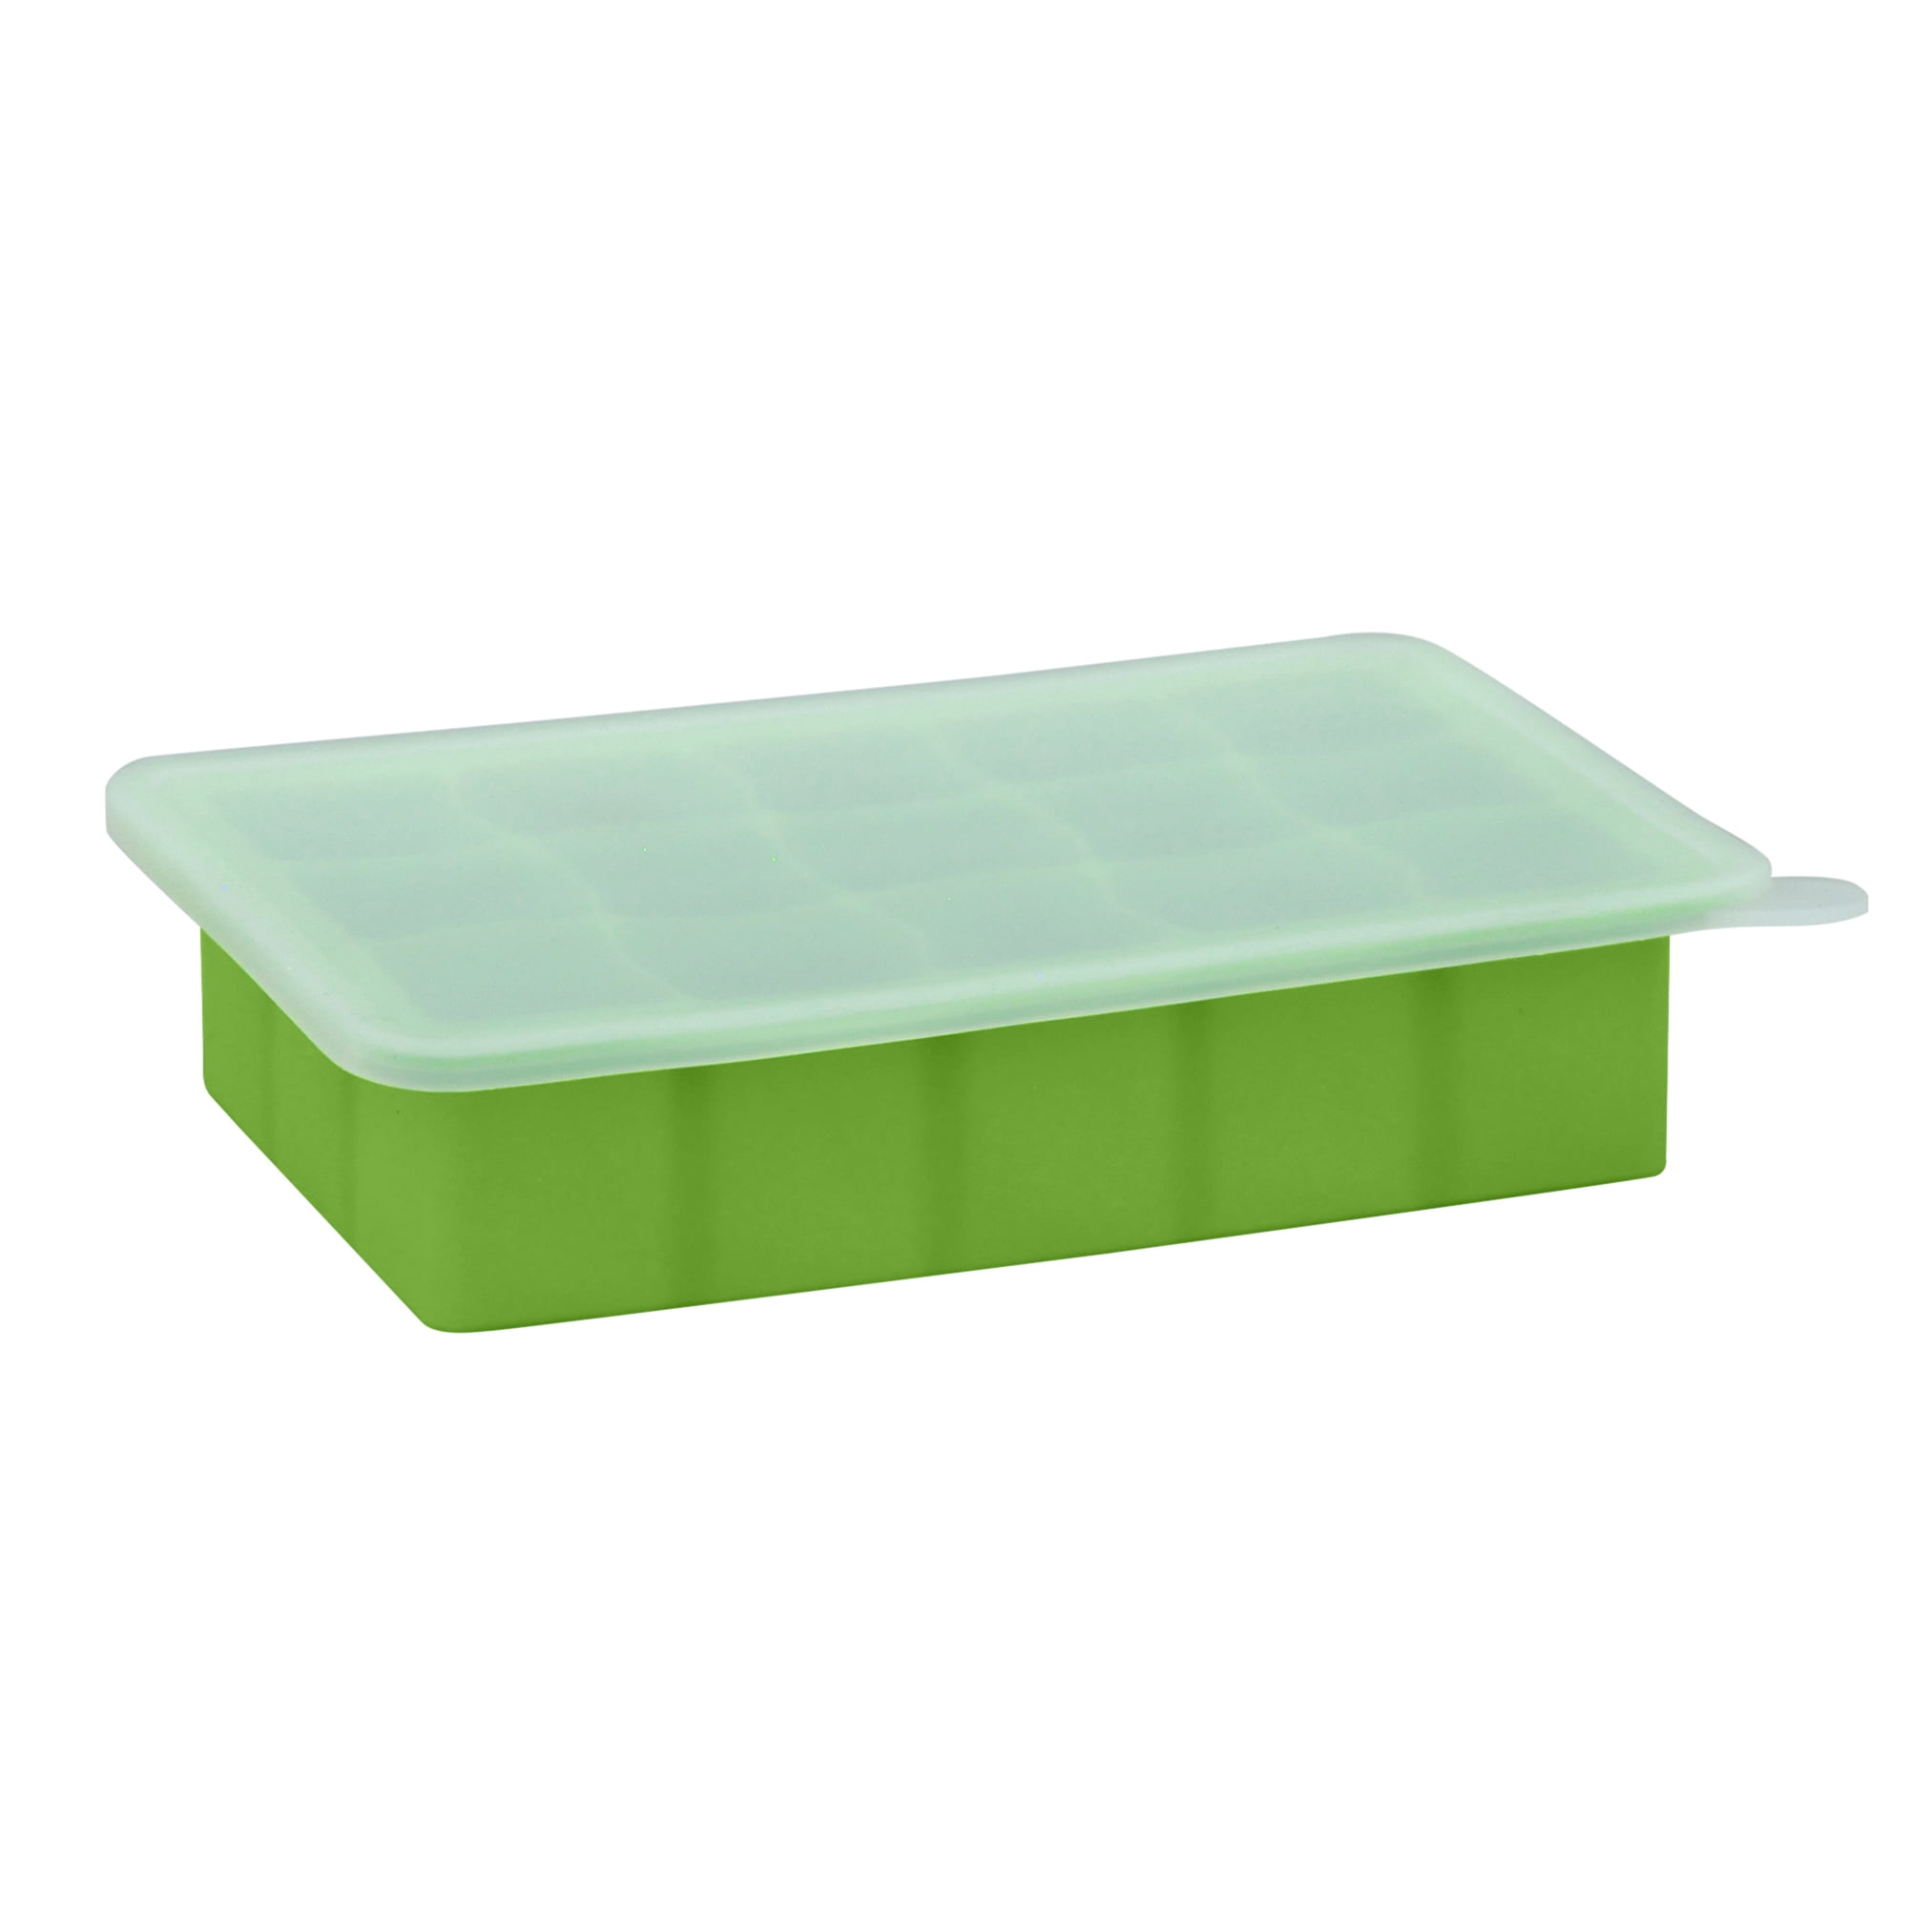 Baby Food Freezer Tray – Clear - otterlove by Platinum Pure